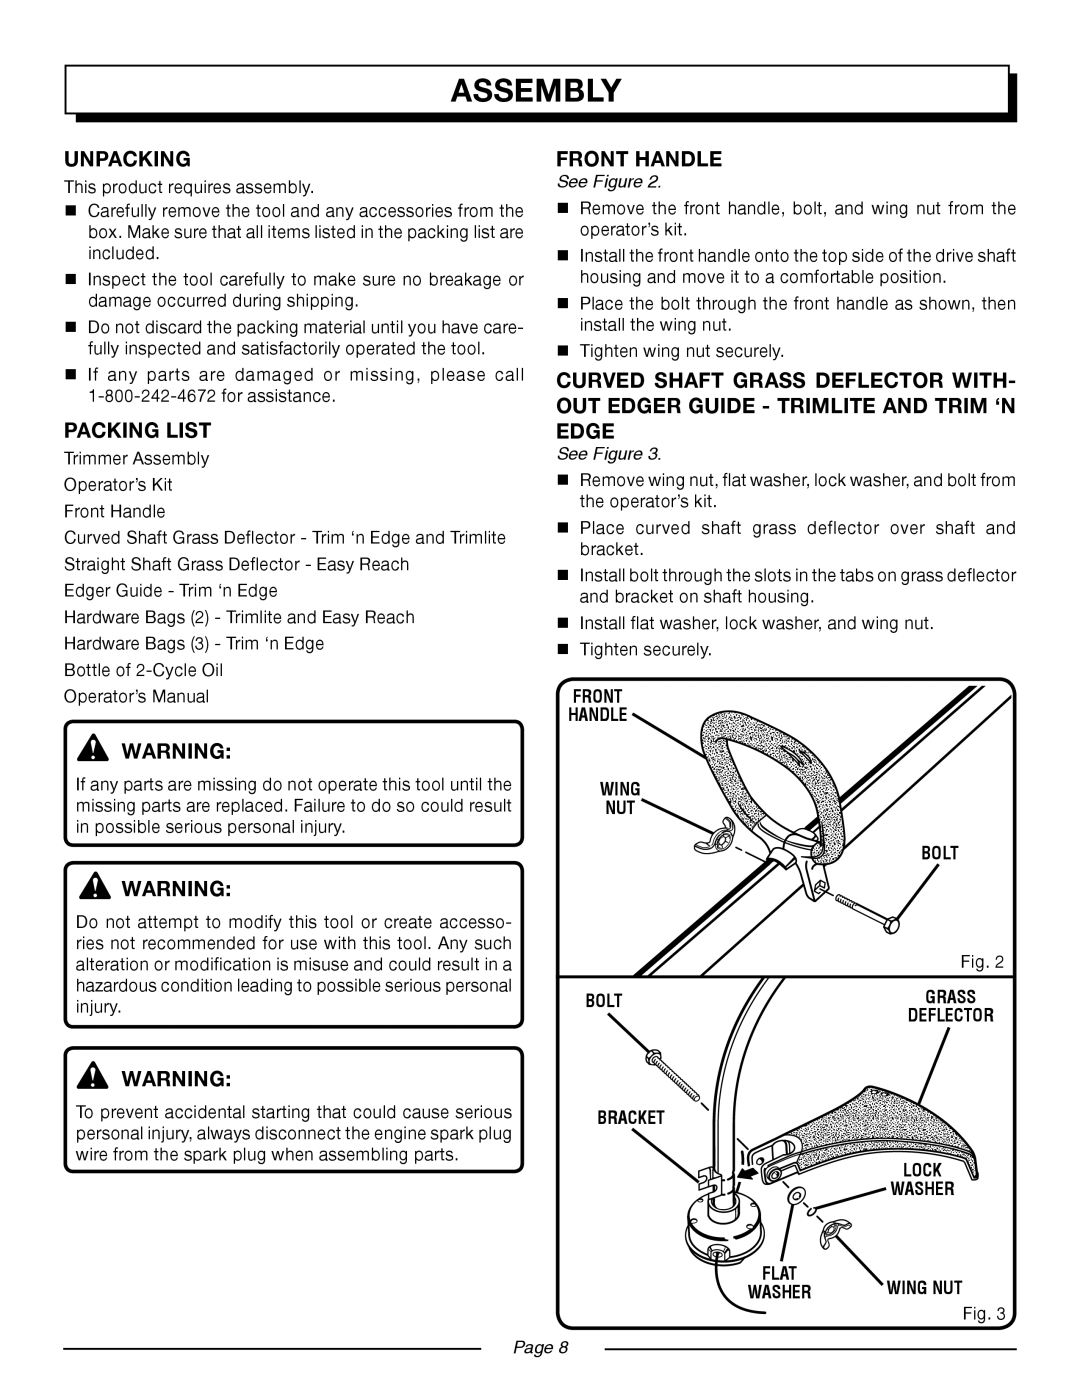 Homelite UT20004B, UT20024B Assembly, Unpacking, Packing List, See Figure, Front Handle Wing Nut Bolt, Bracket, Page 